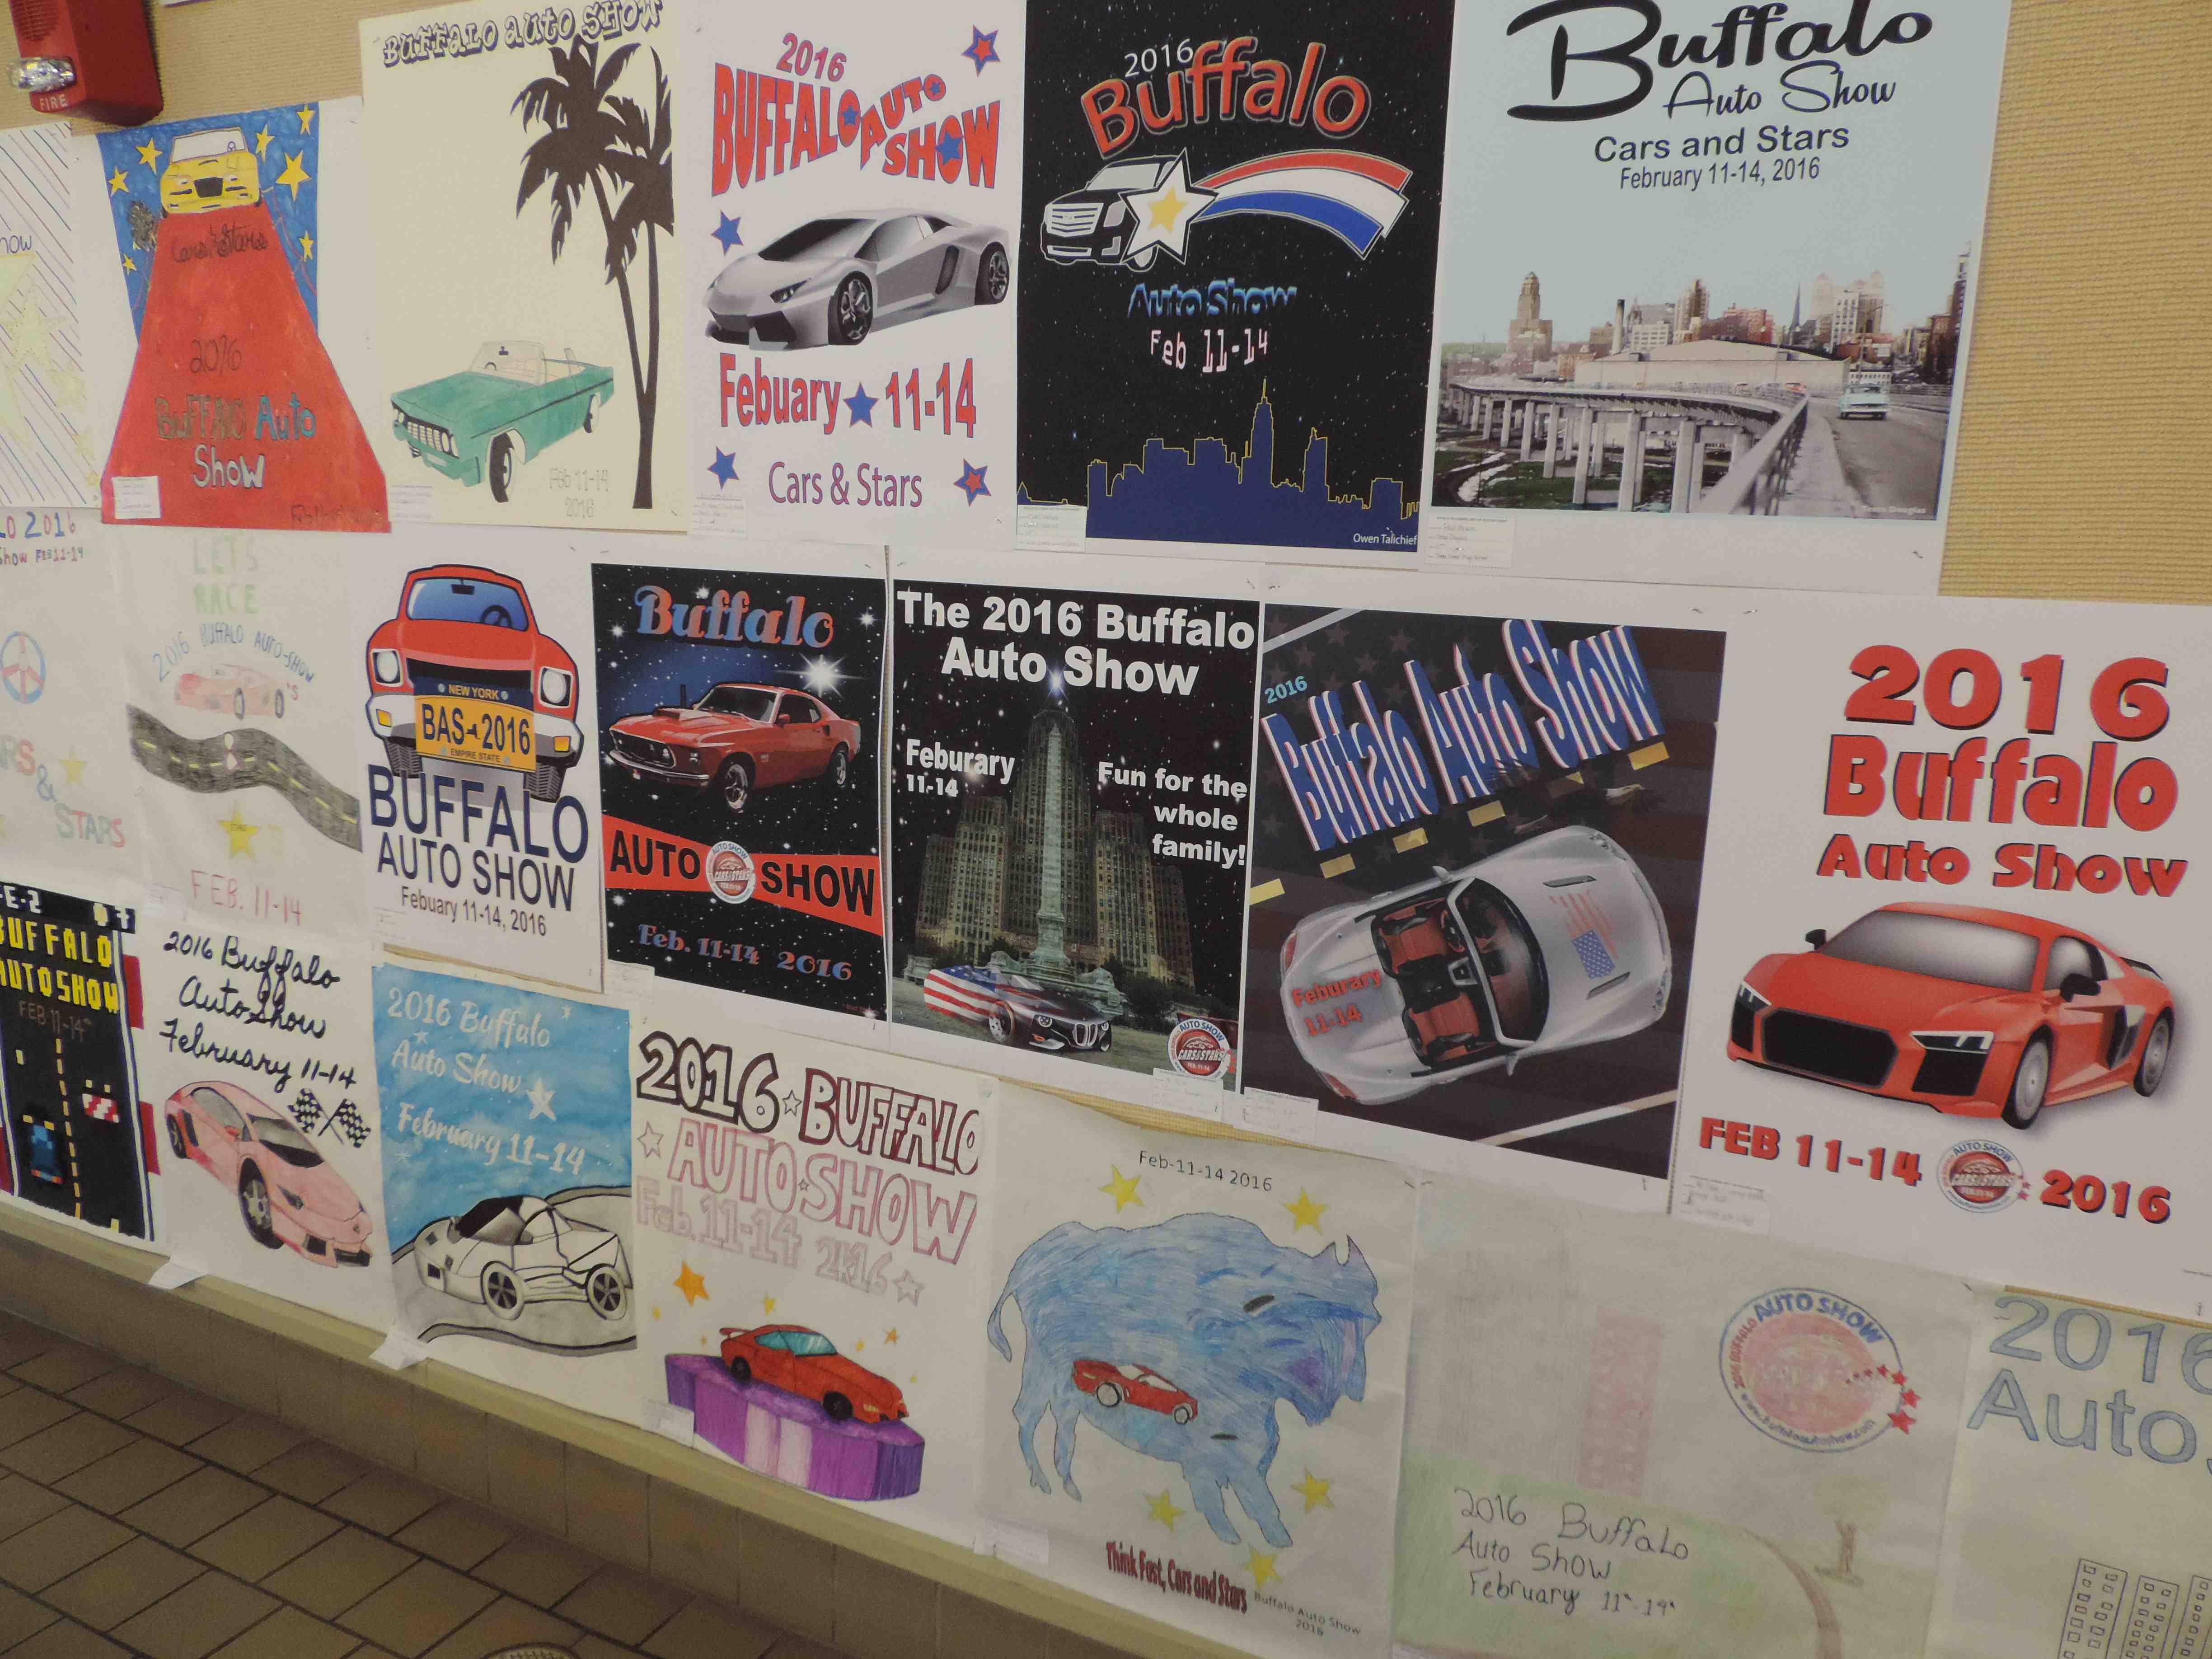 NFADA to announce Buffalo Auto Show poster contest winners